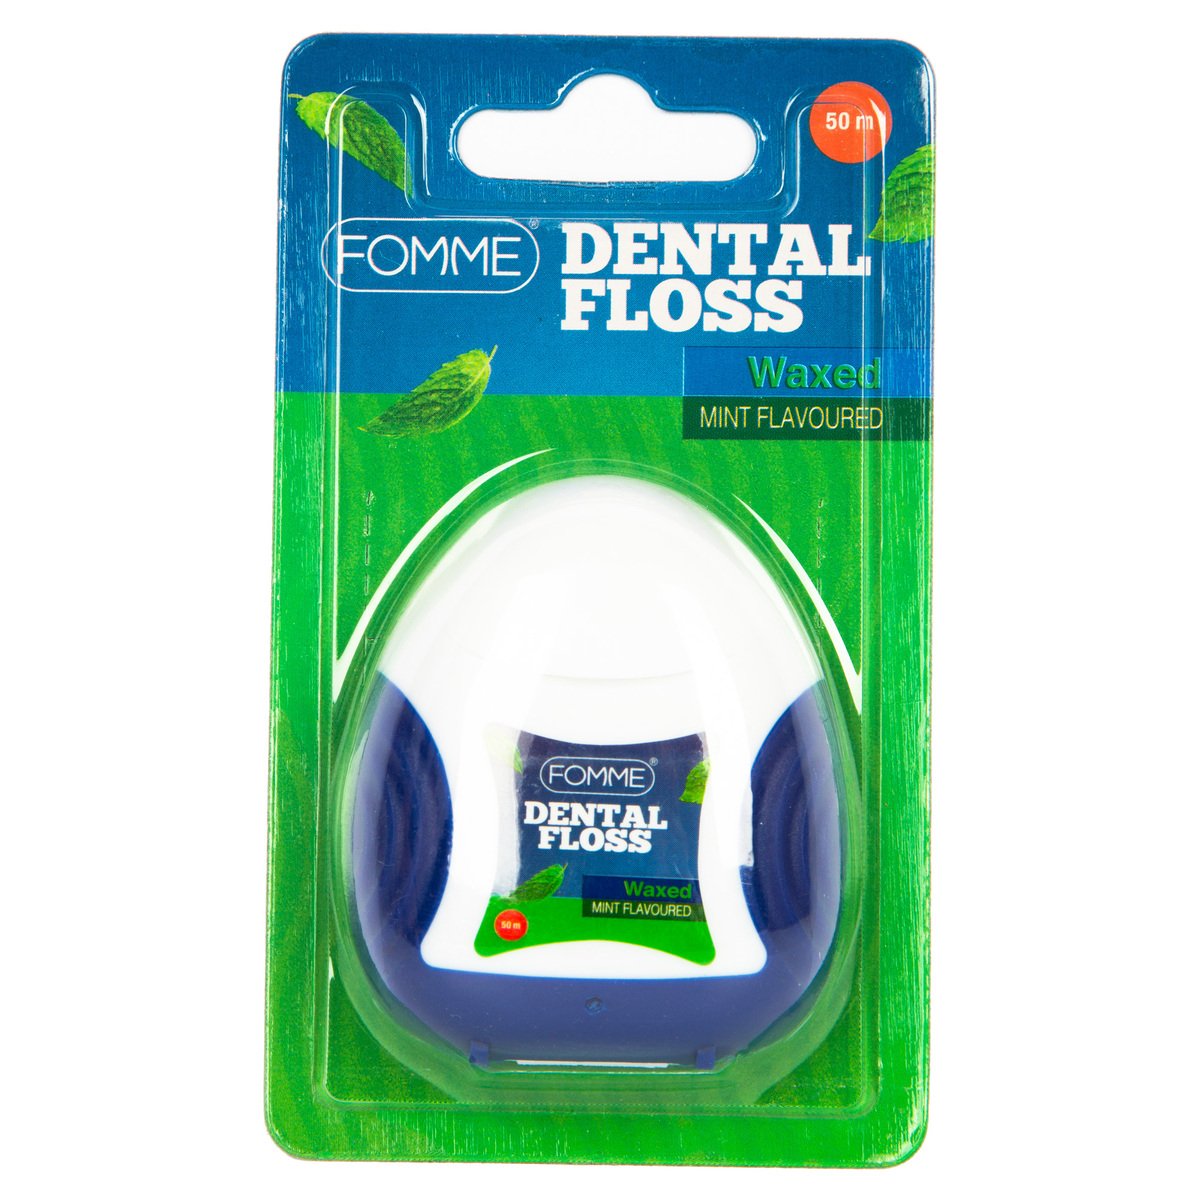 Fomme Waxed Mint Flavoured Dental Floss 50m 1pc